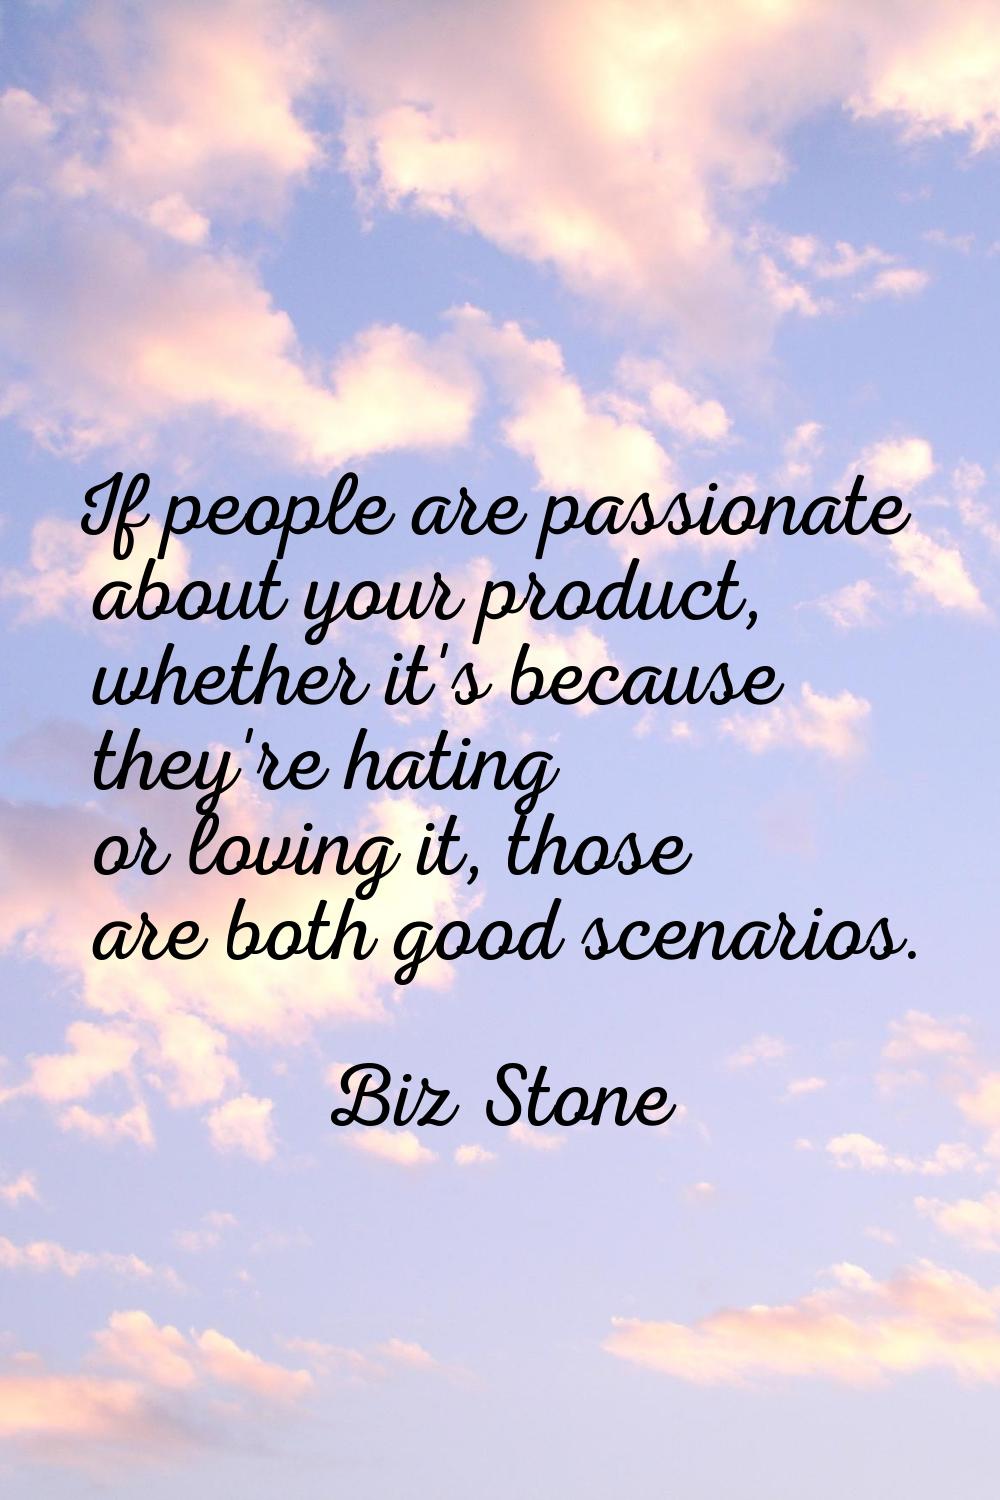 If people are passionate about your product, whether it's because they're hating or loving it, thos